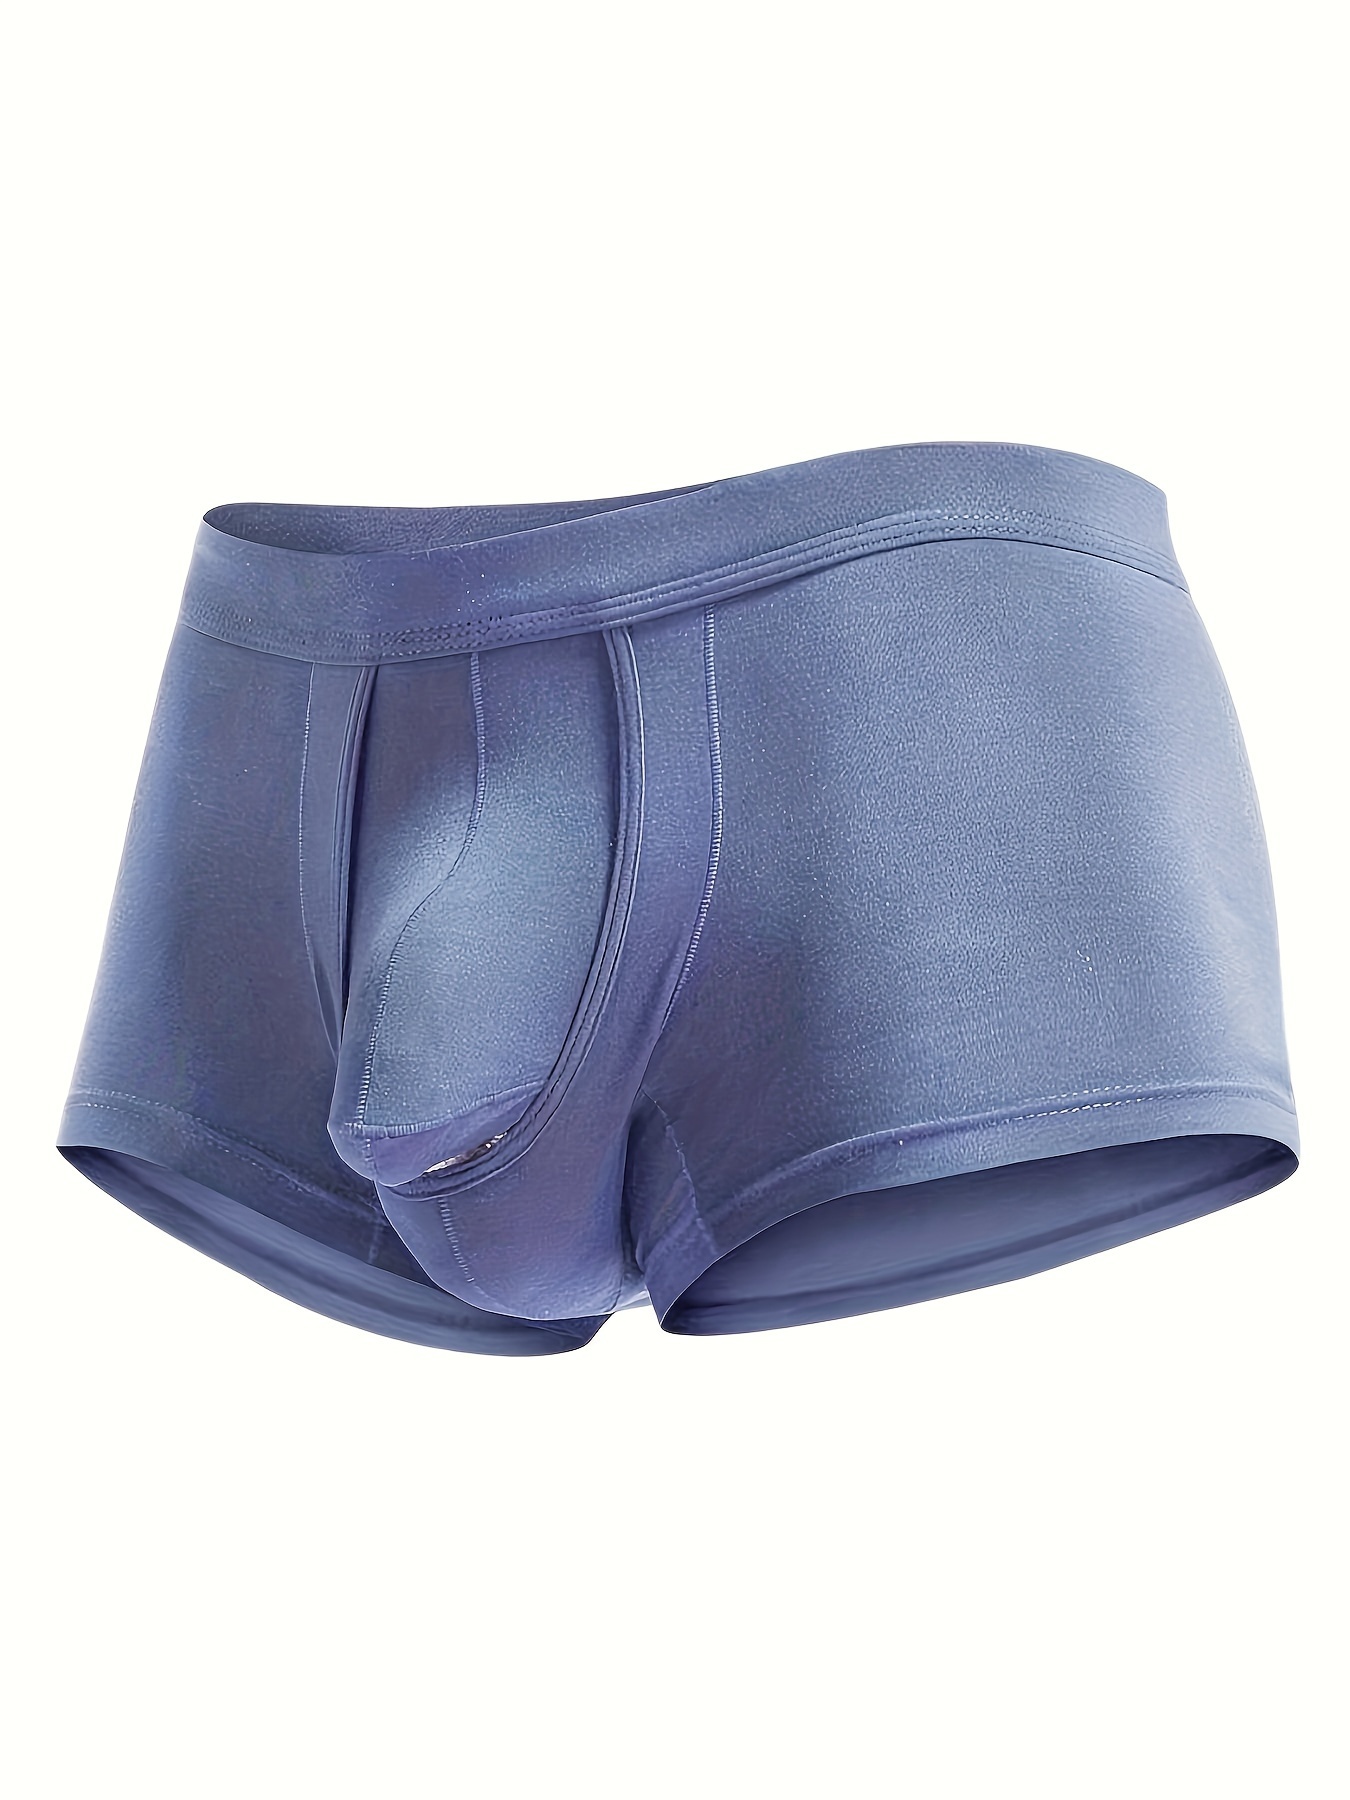 Mens Underwear Separate Ball Pouch Boxer Trunks Breathable Comfort